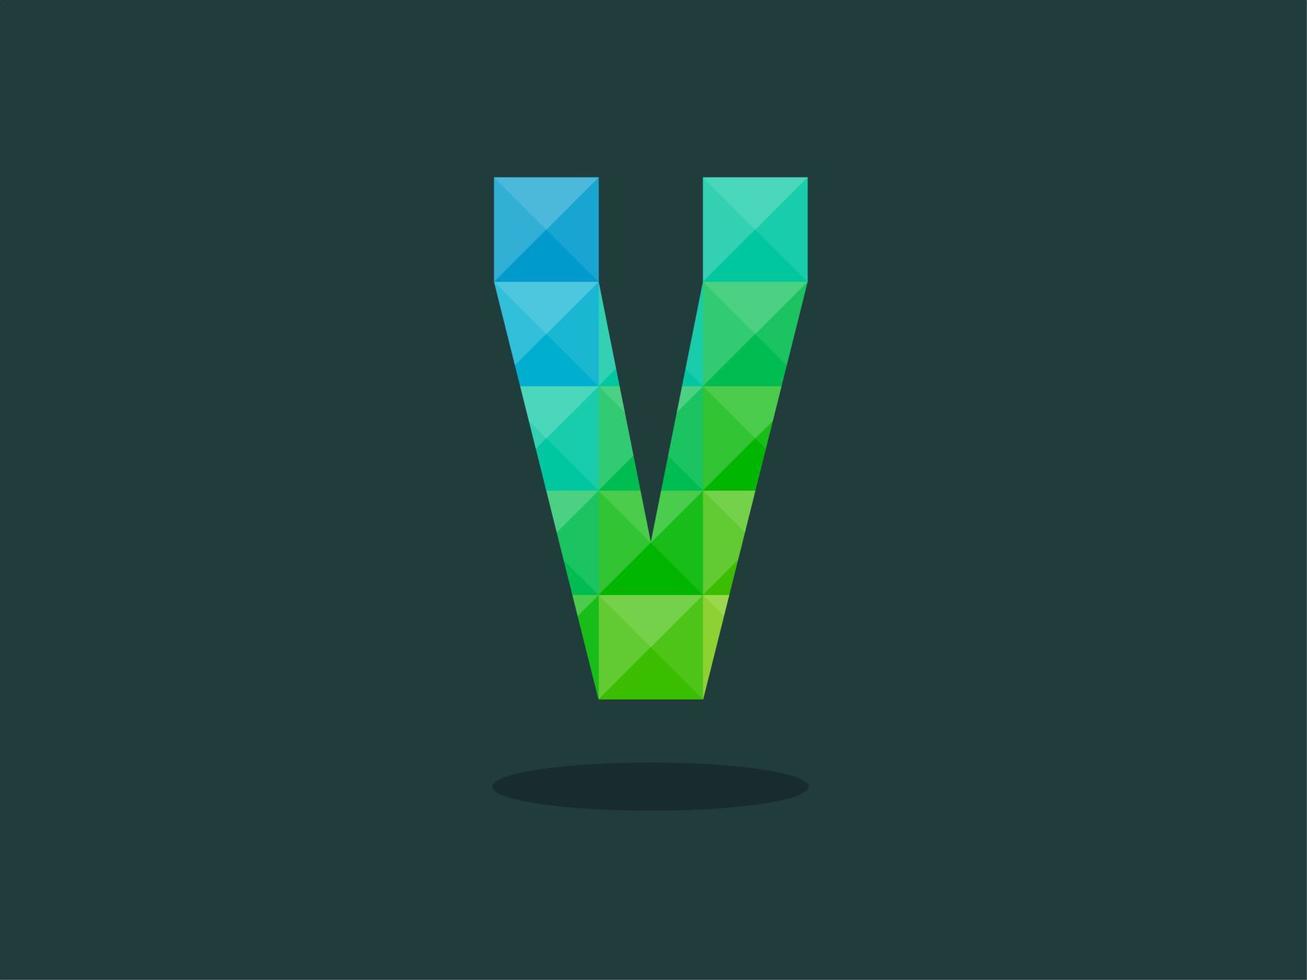 Alphabet letter V with perfect combination of bright blue-green colors. Good for print, t-shirt design, logo, etc. Vector illustrations.